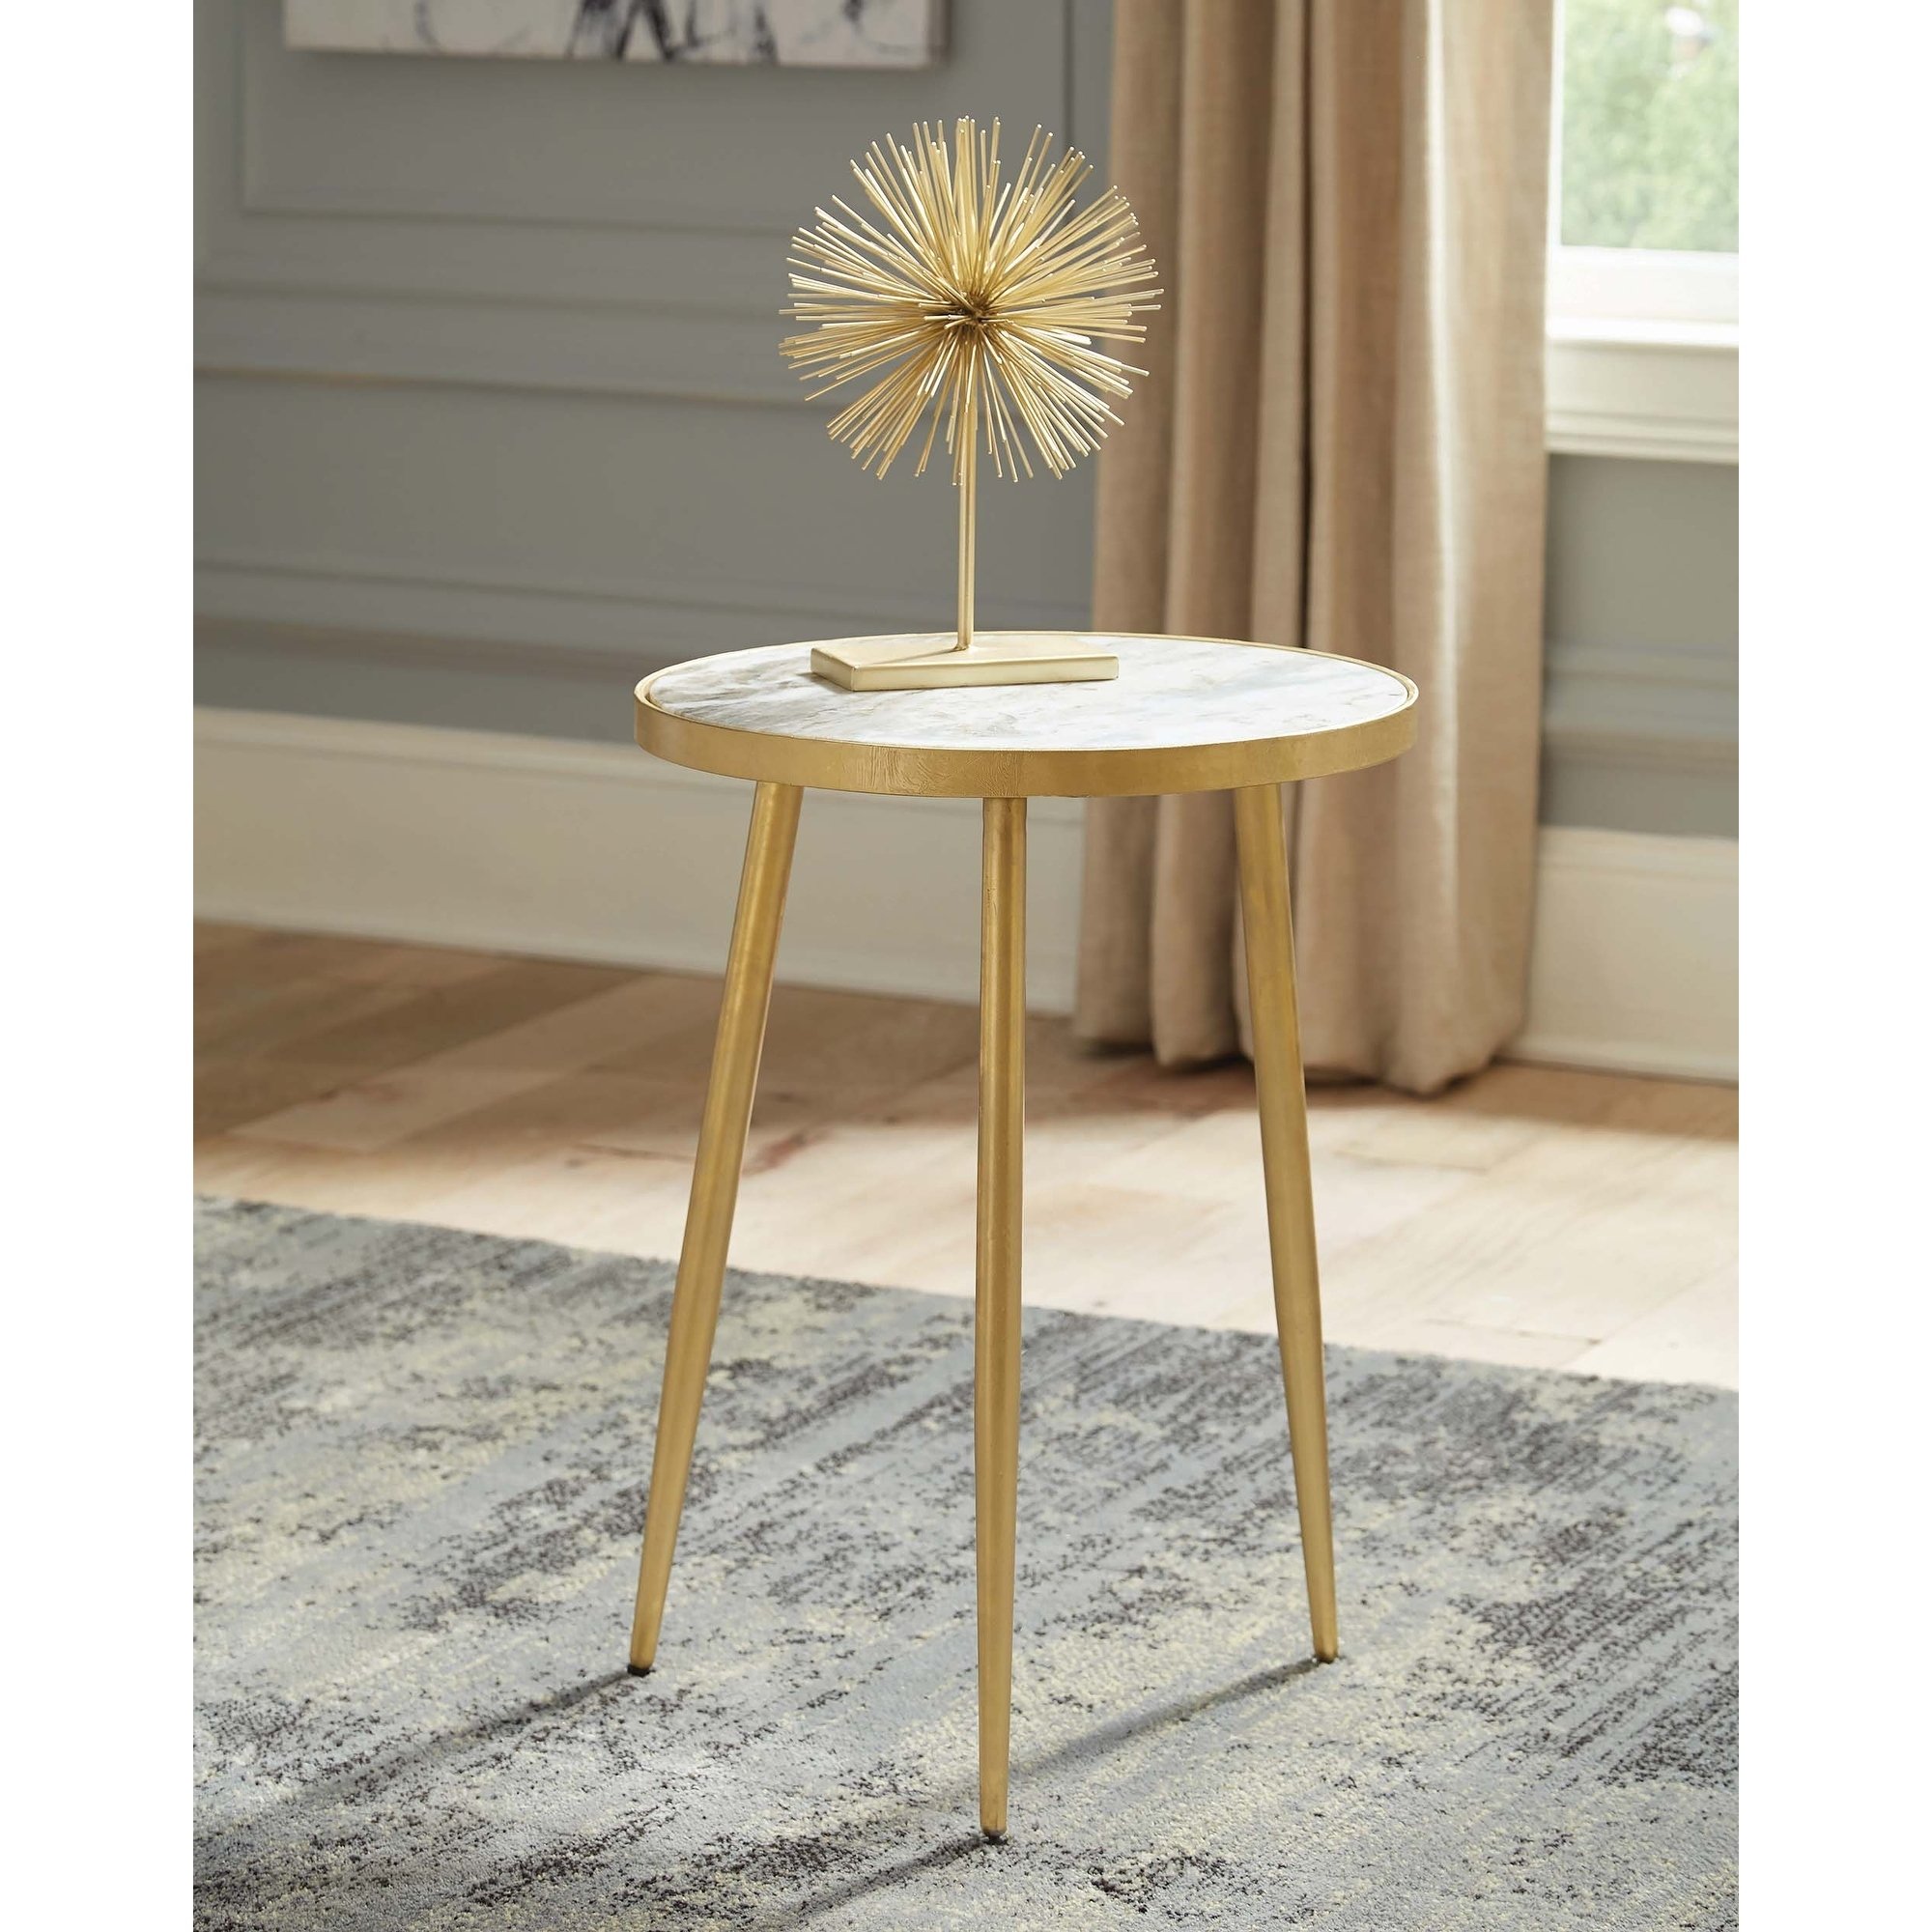 white and gold round accent table free shipping signy drum with marble top today pulaski furniture reviews long bar chairs apothecary chest ikea storage units bedroom narrow